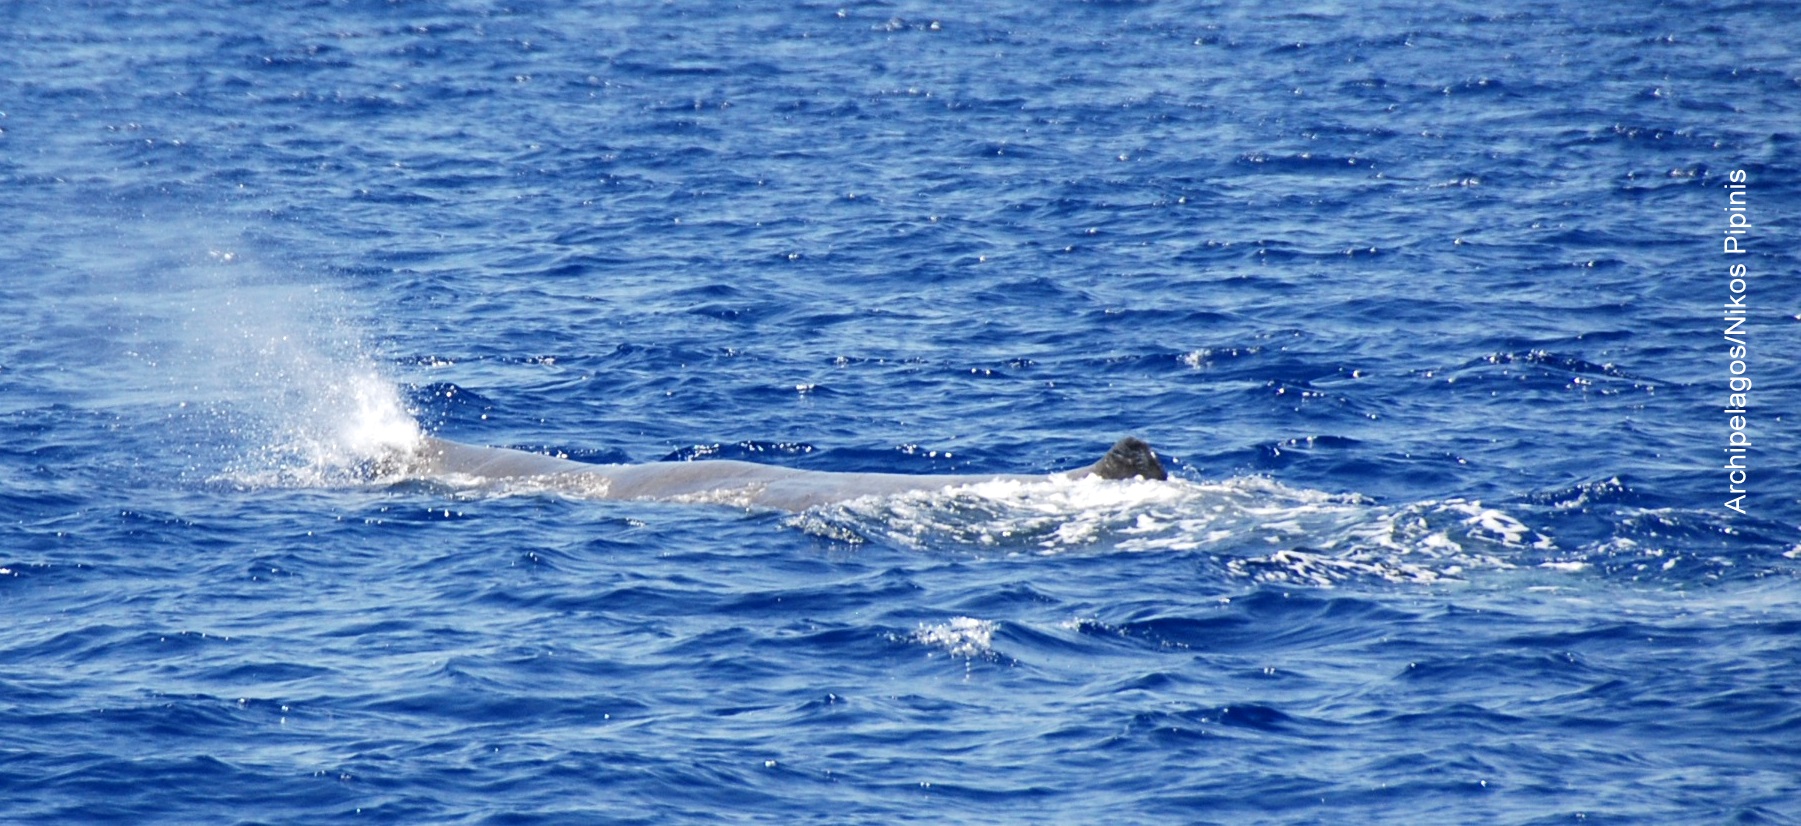 Cetaceans in the Ionian Sea